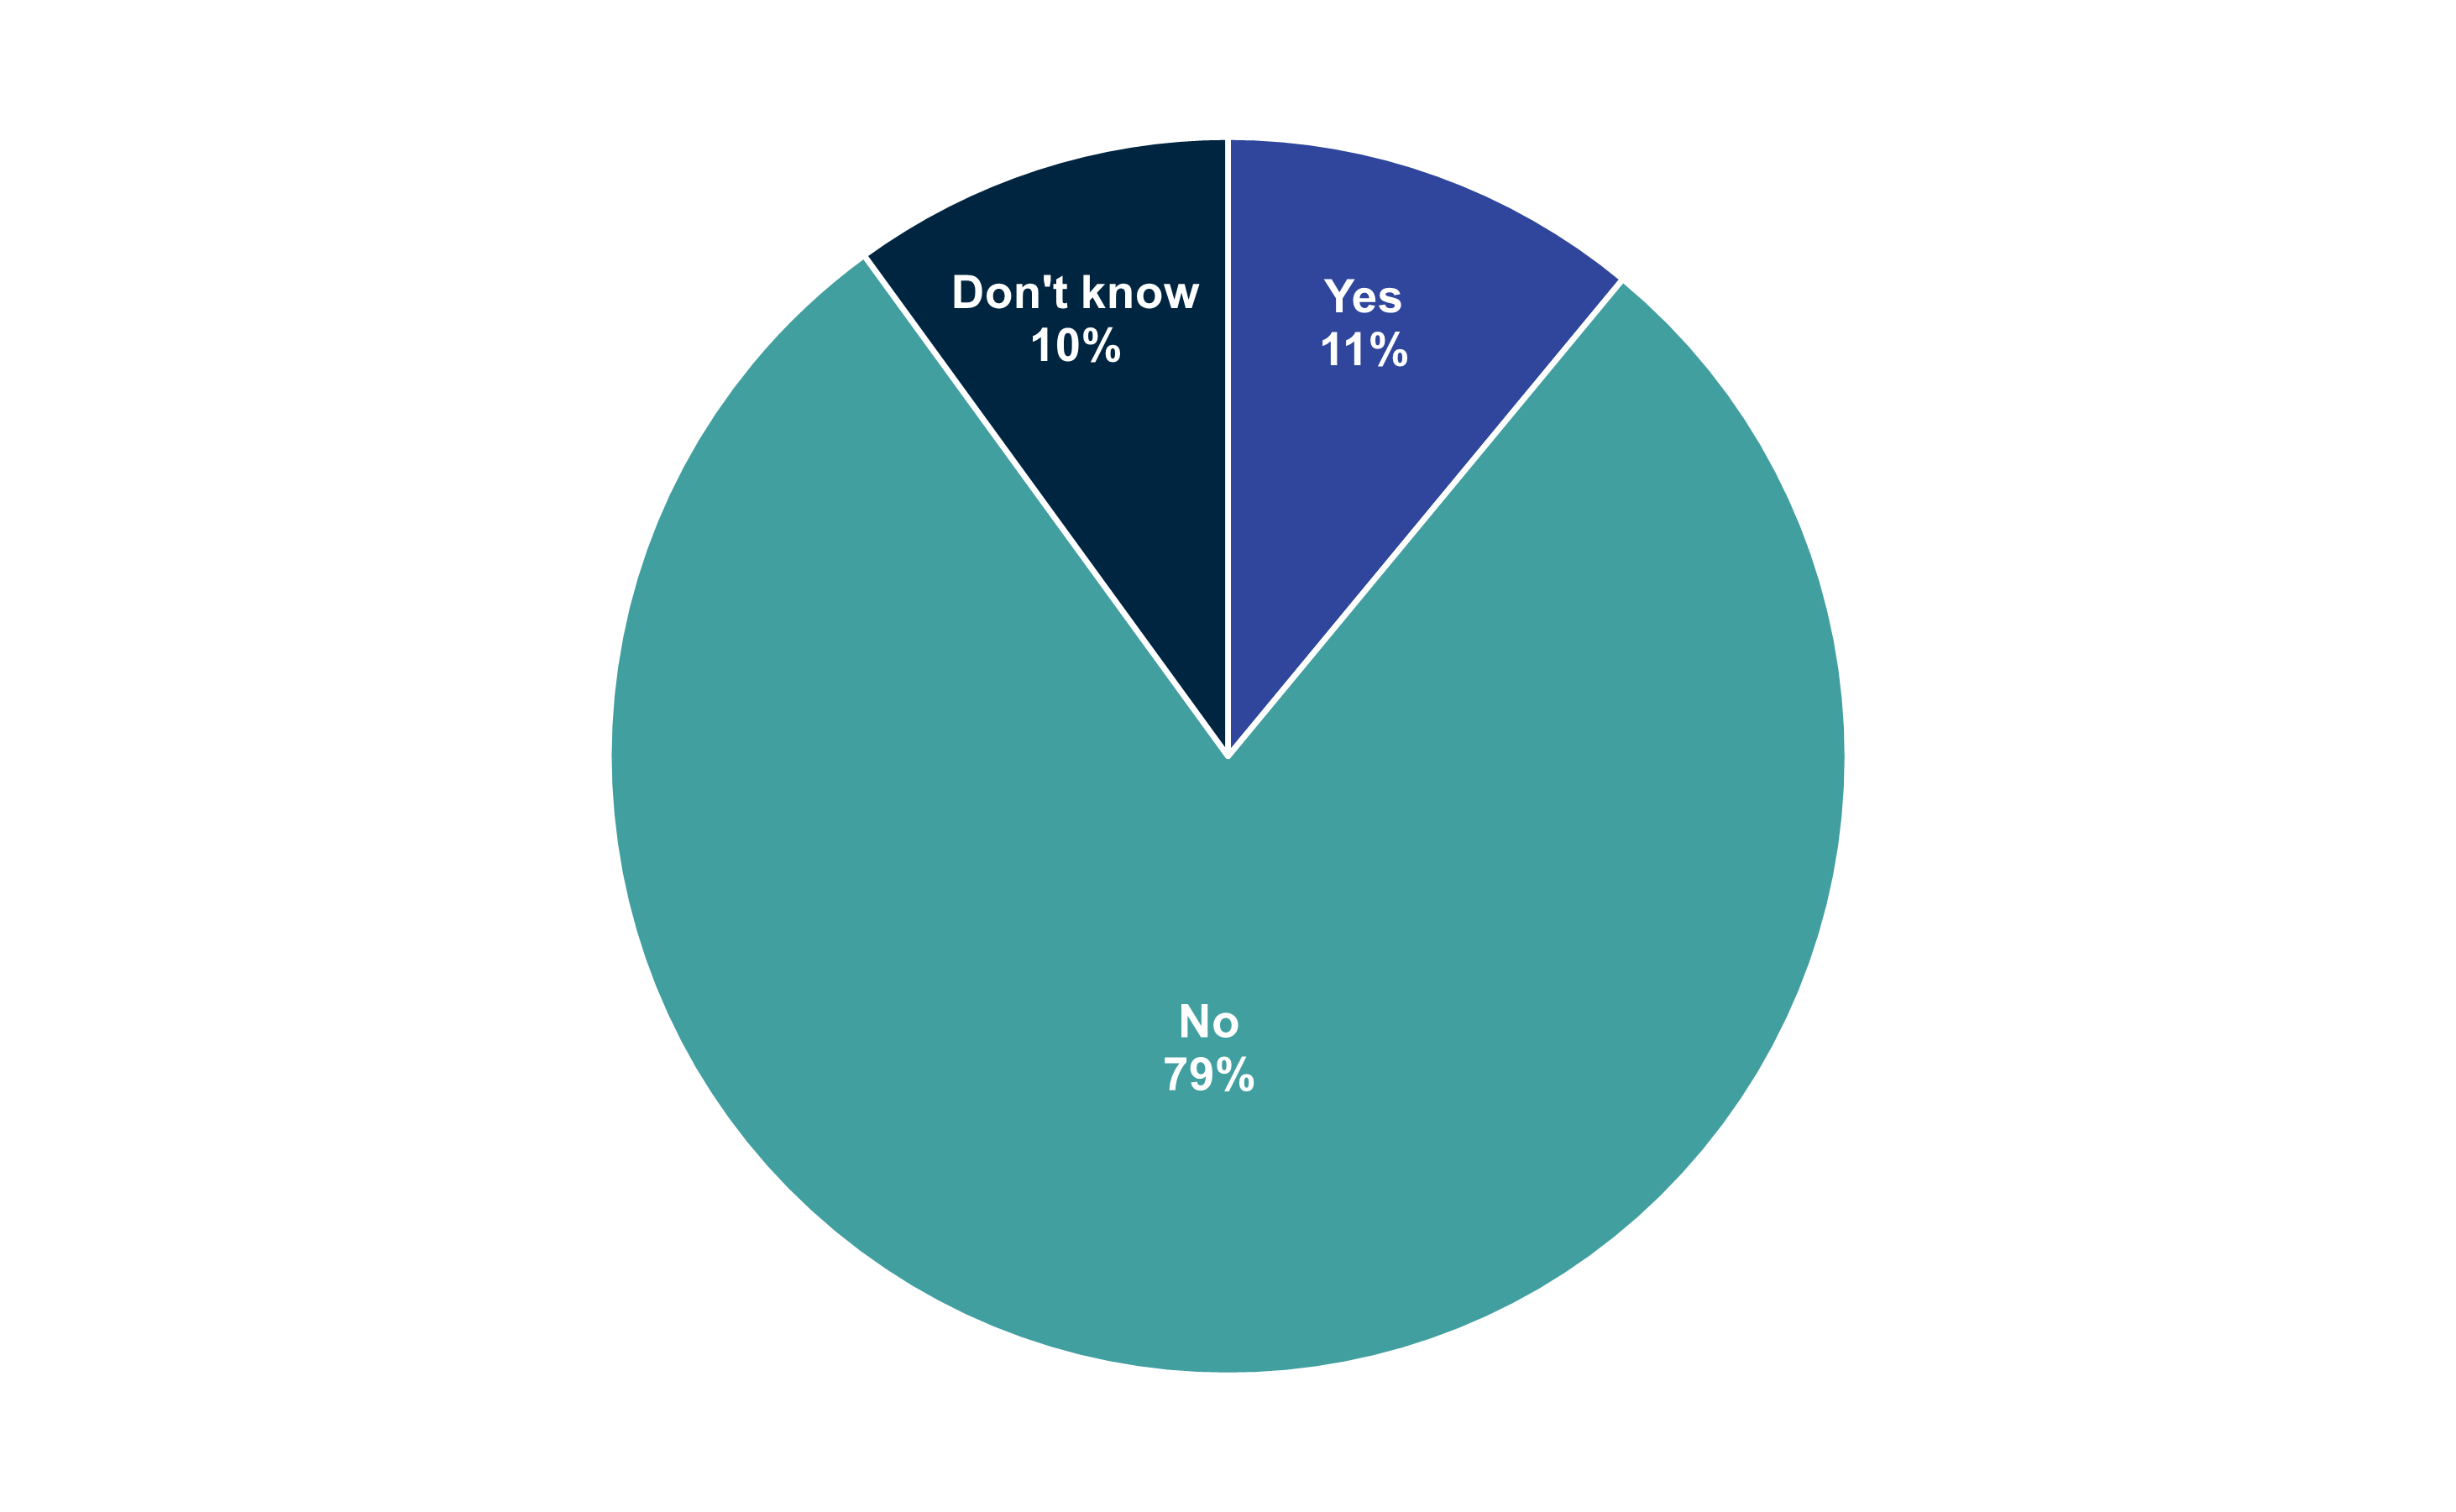 A pie chart showing whether young people have ever used apps or websites which allow them to use virtual money or tokens to bet on sports matches. Options were 'Yes', 'No' and 'Don't know'. Data from the chart is provided within the following table.